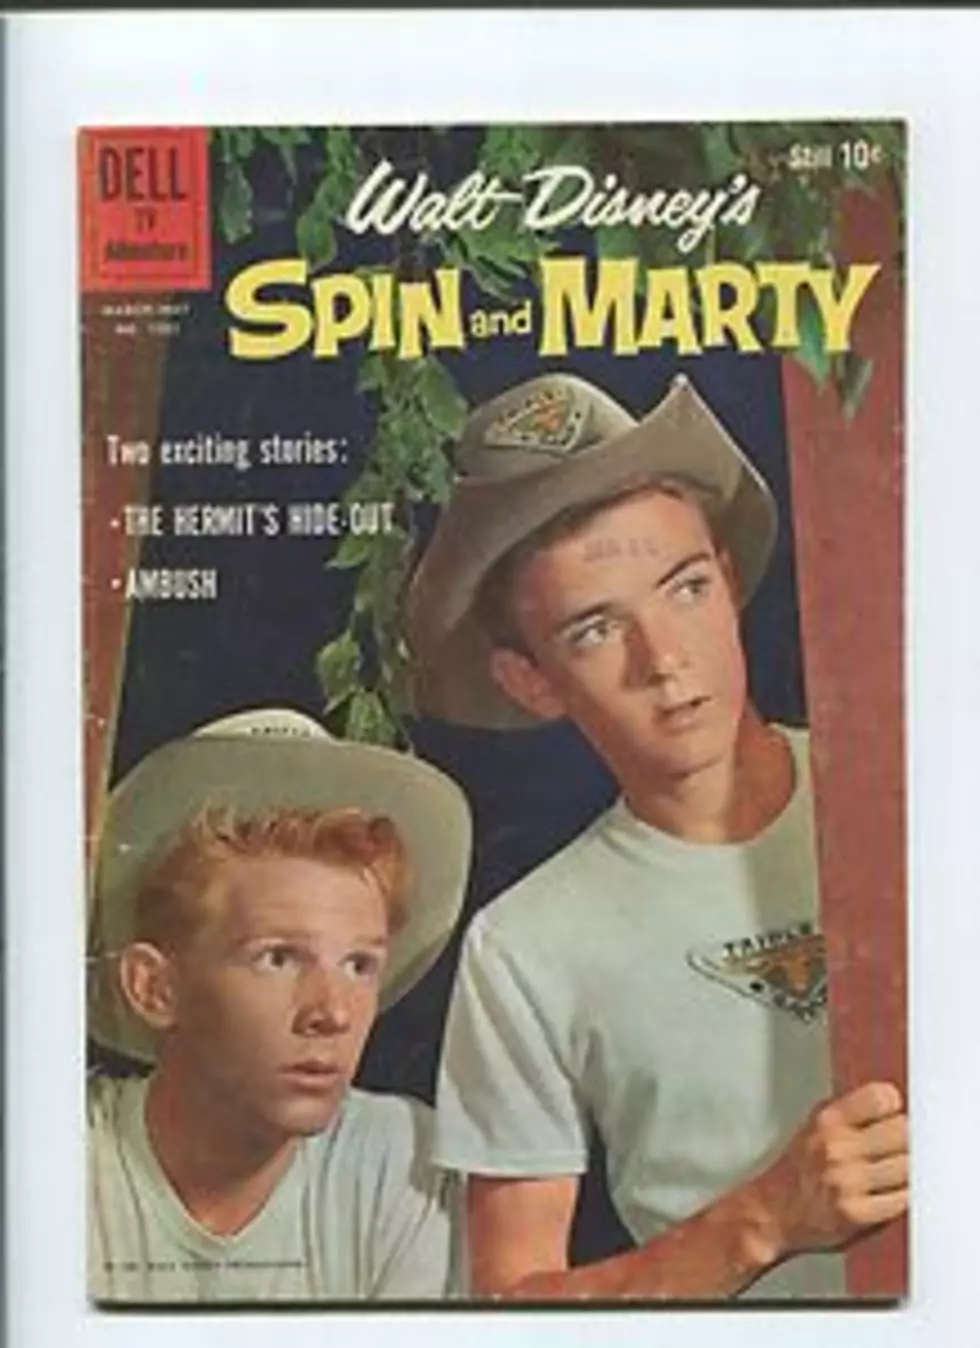 Baby Boomer Alert: Disney’s “Spin And Marty” Started Out As An 11-Minute Show! (VIDEO)